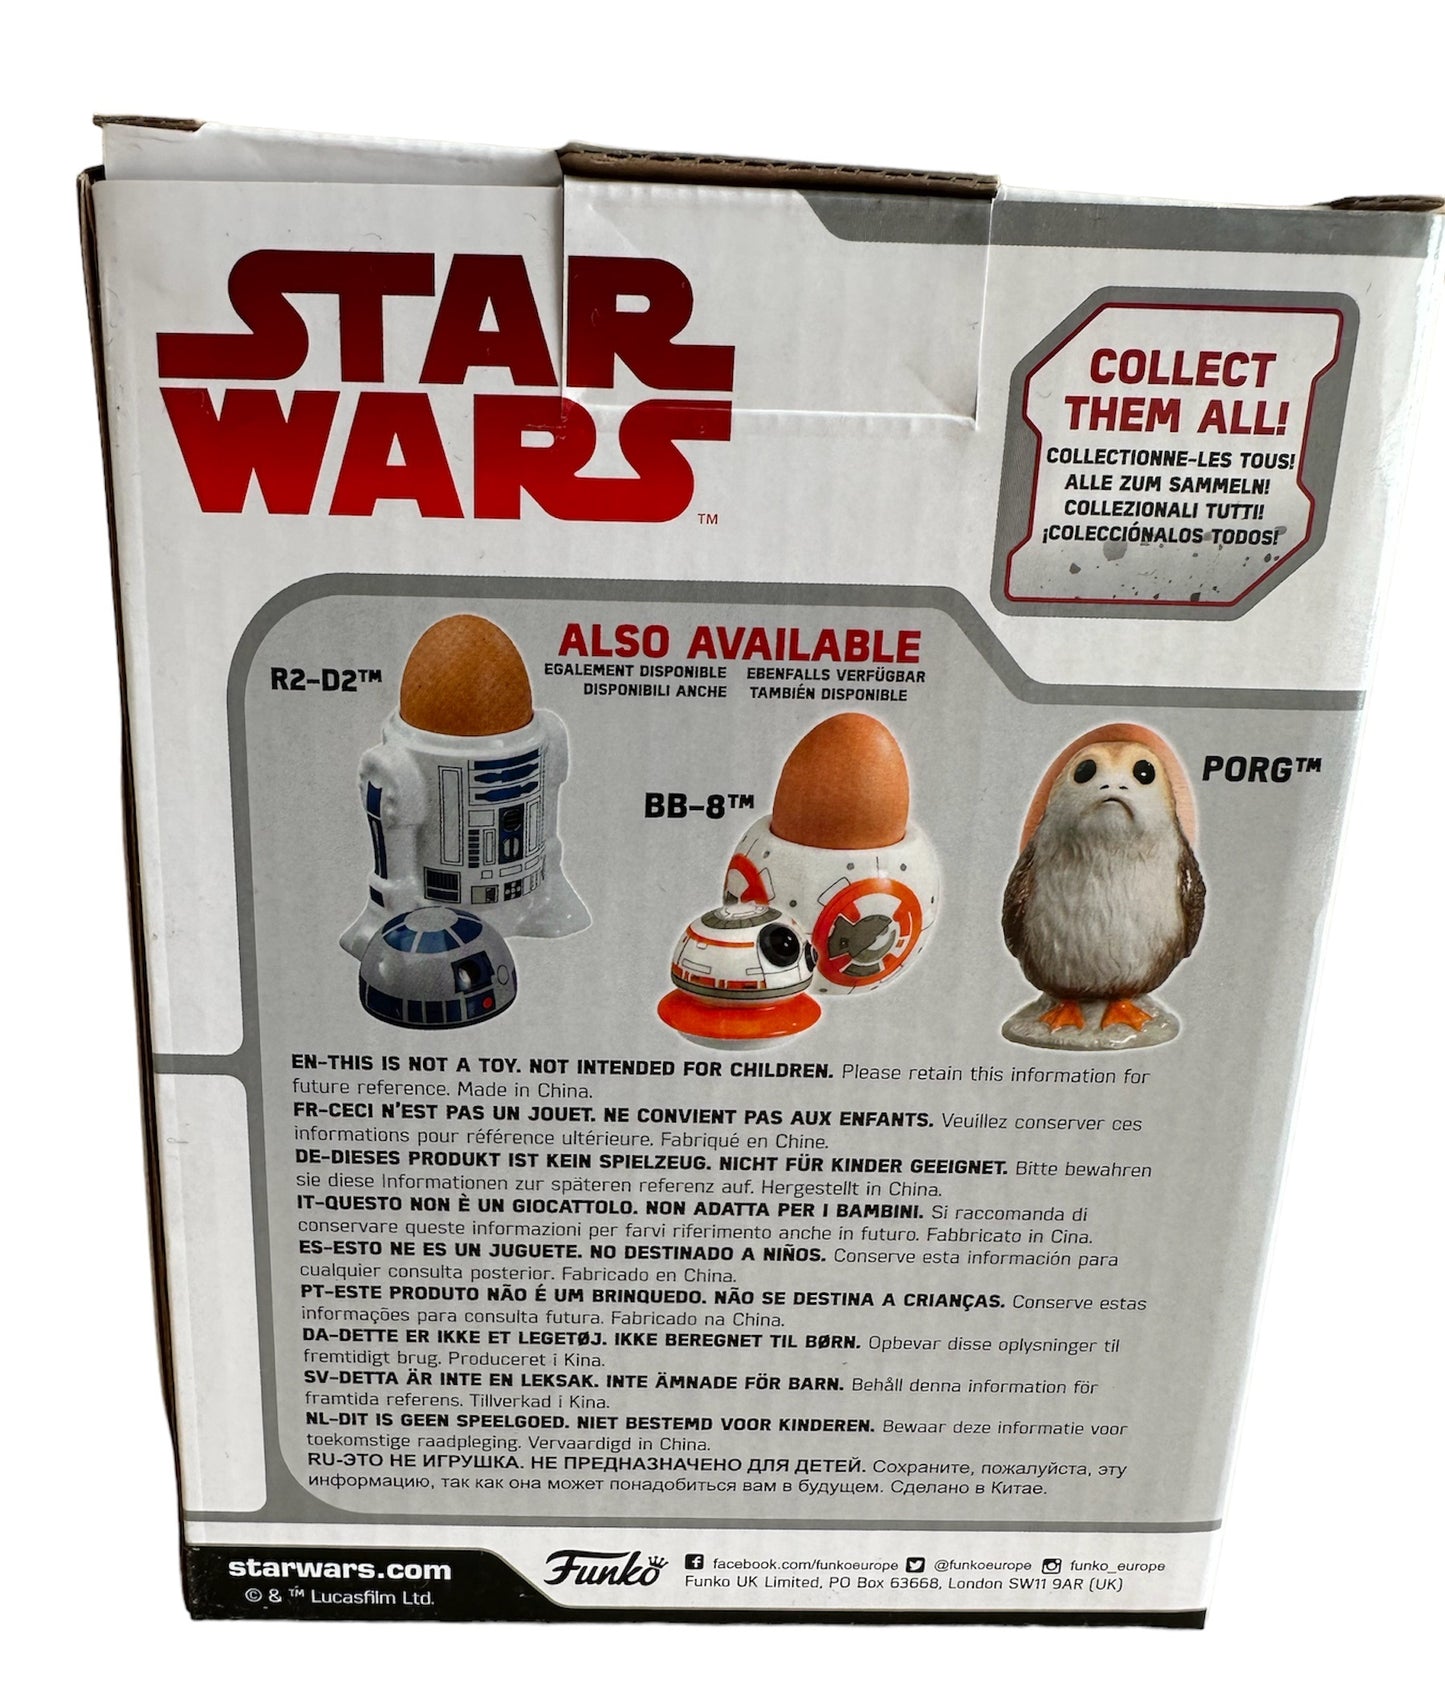 Funko 2017 - Star Wars The Last Jedi - BB-8 Gold Egg Cup - Brand New Factory Sealed Shop Stock Room Find